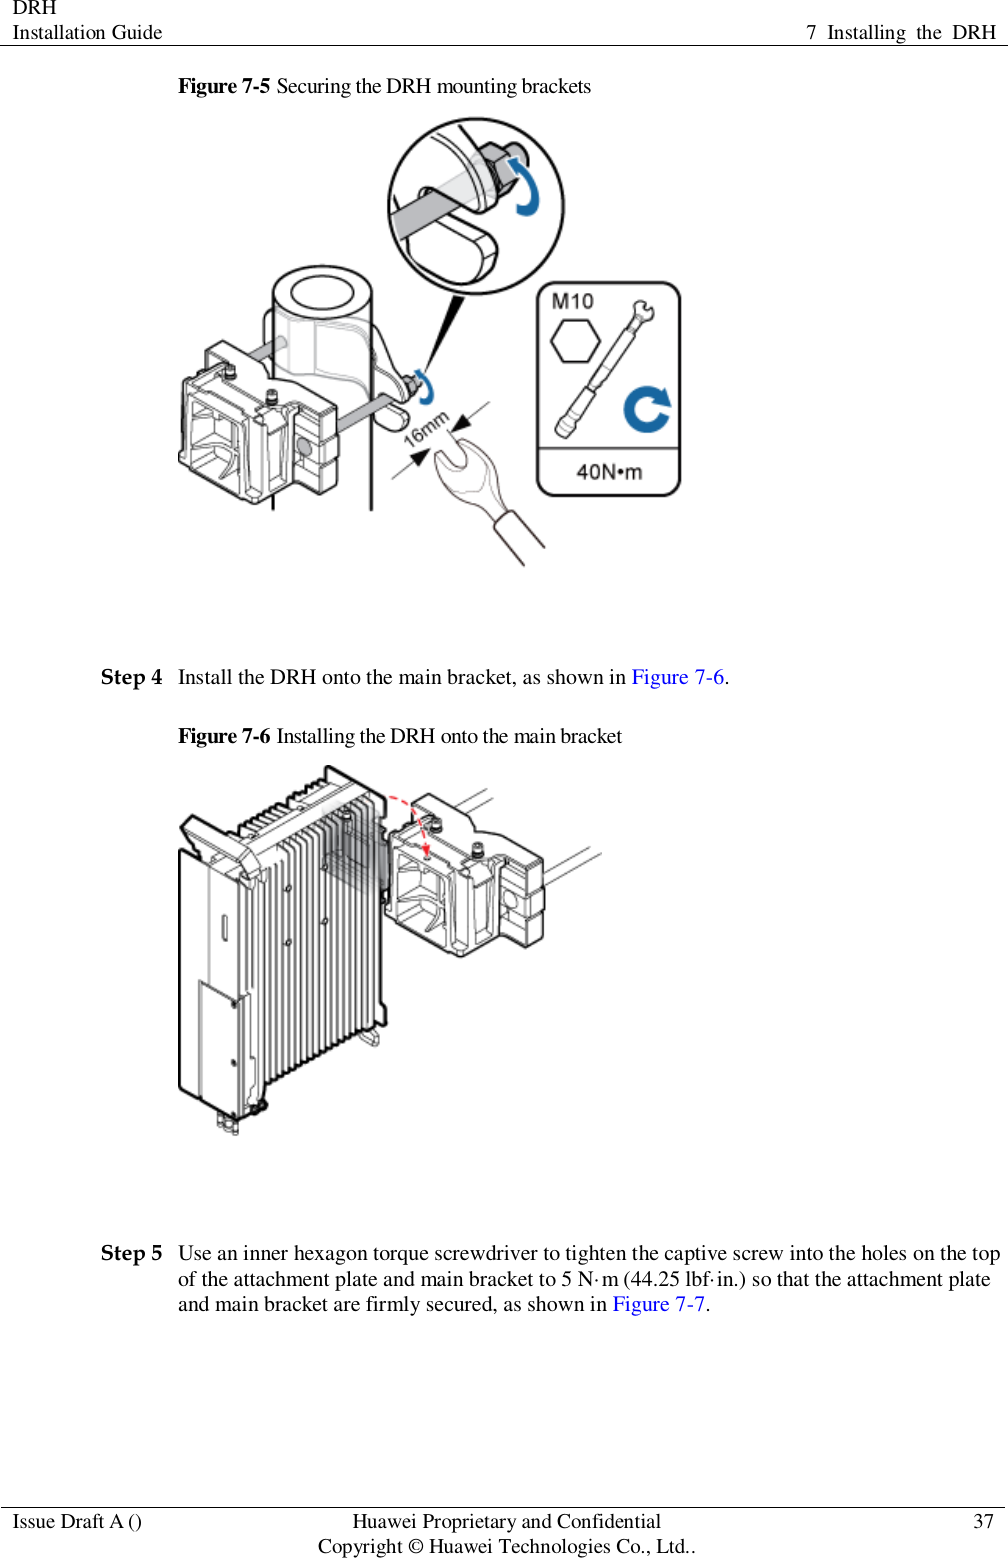 DRH   Installation Guide 7  Installing  the  DRH  Issue Draft A () Huawei Proprietary and Confidential                                     Copyright © Huawei Technologies Co., Ltd.. 37  Figure 7-5 Securing the DRH mounting brackets   Step 4 Install the DRH onto the main bracket, as shown in Figure 7-6. Figure 7-6 Installing the DRH onto the main bracket   Step 5 Use an inner hexagon torque screwdriver to tighten the captive screw into the holes on the top of the attachment plate and main bracket to 5 N·m (44.25 lbf·in.) so that the attachment plate and main bracket are firmly secured, as shown in Figure 7-7. 